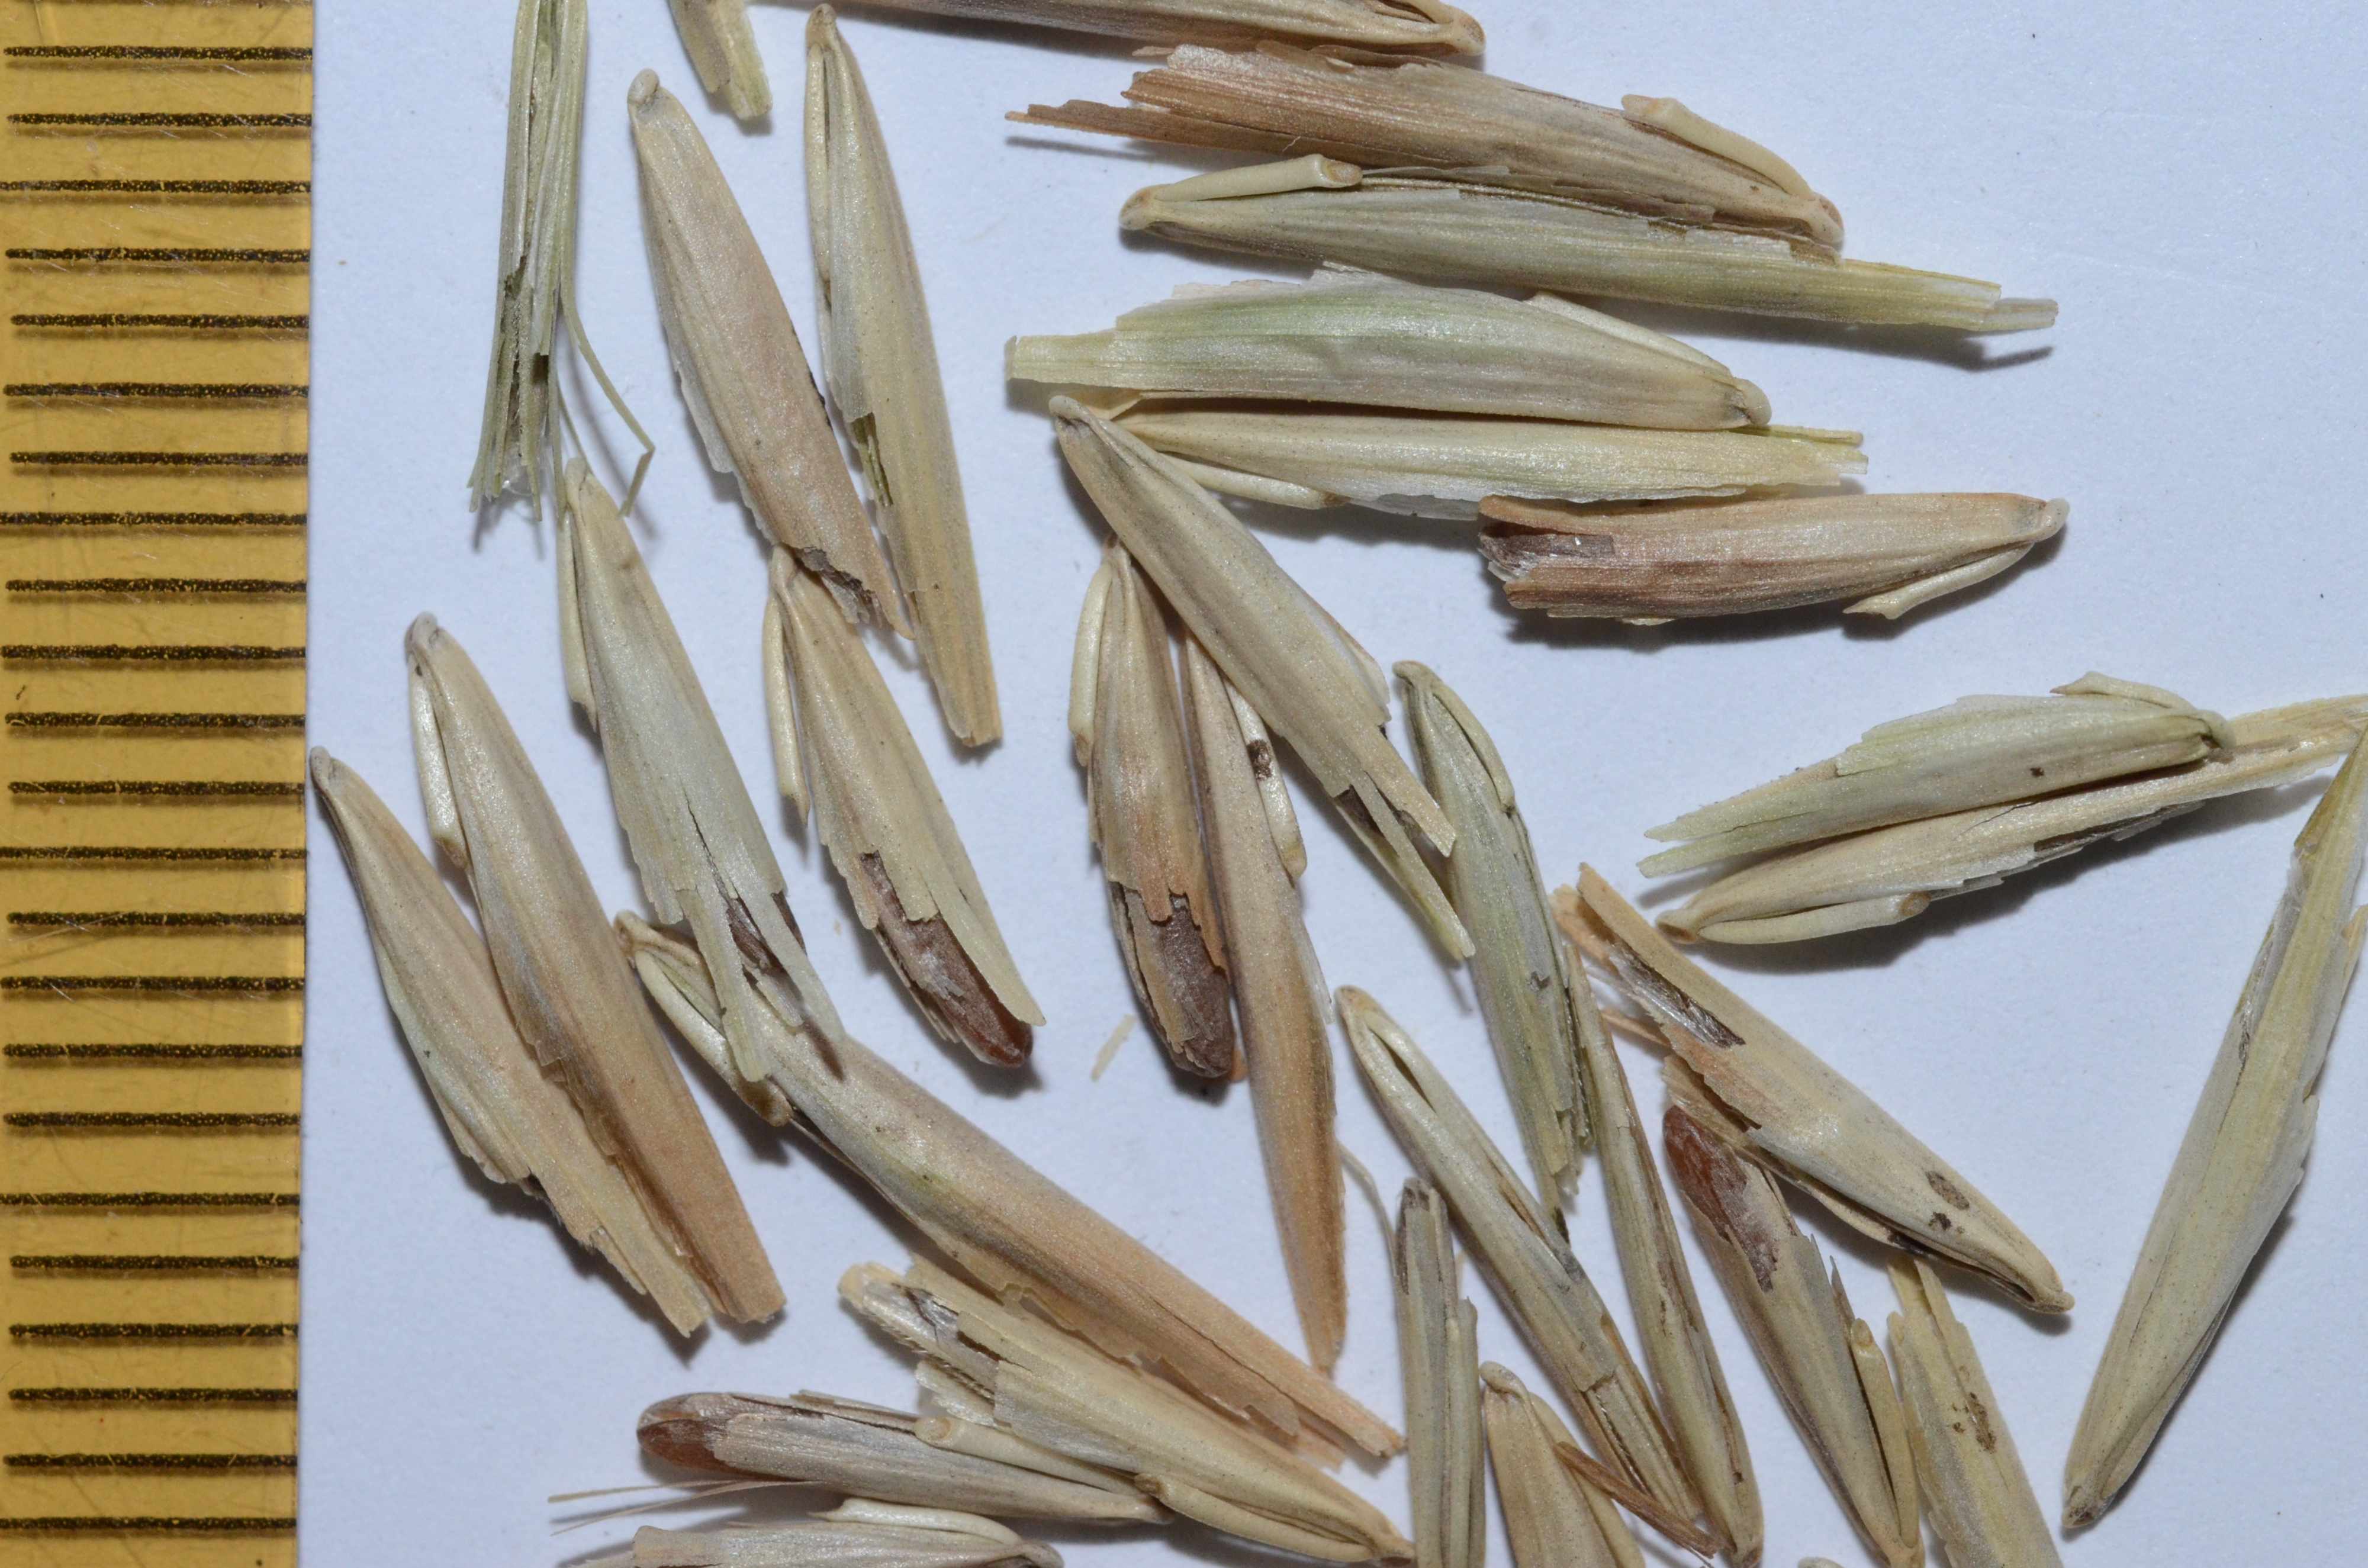 Bromus sitchensis var. carinatus fruits with mm ruler on right.